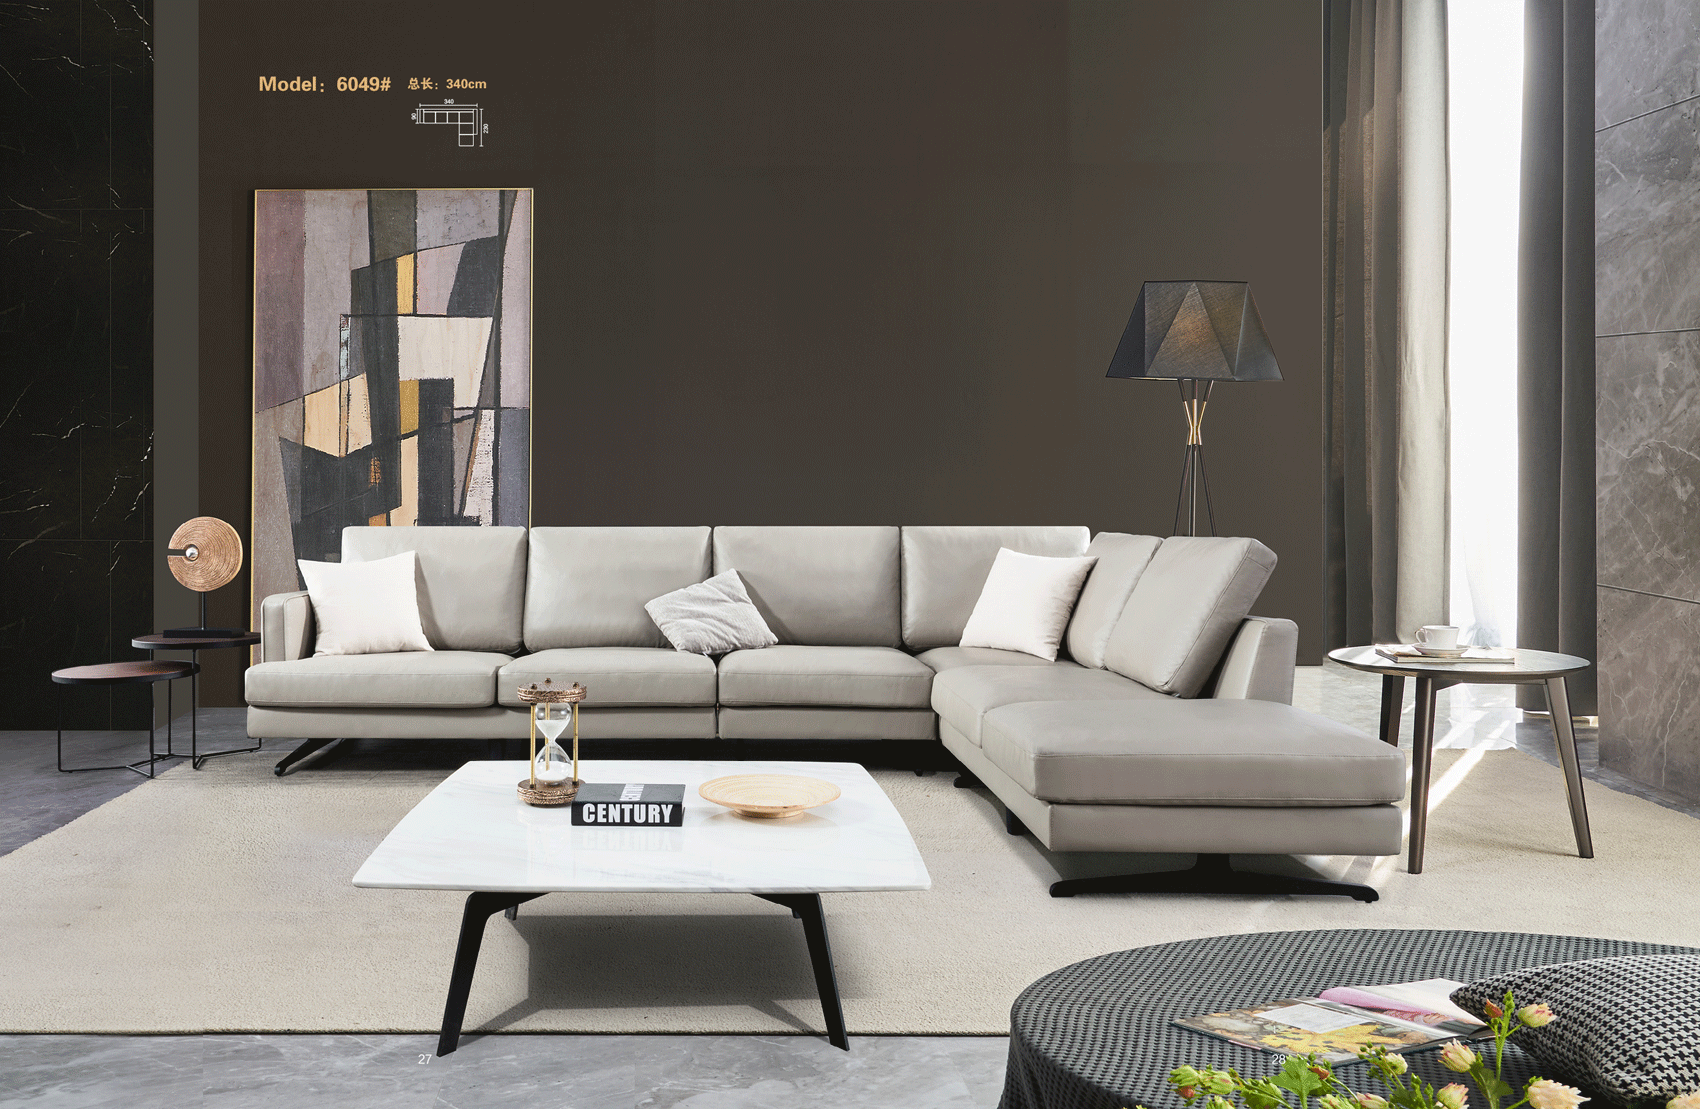 Living Room Furniture Sleepers Sofas Loveseats and Chairs 6049 Sectional